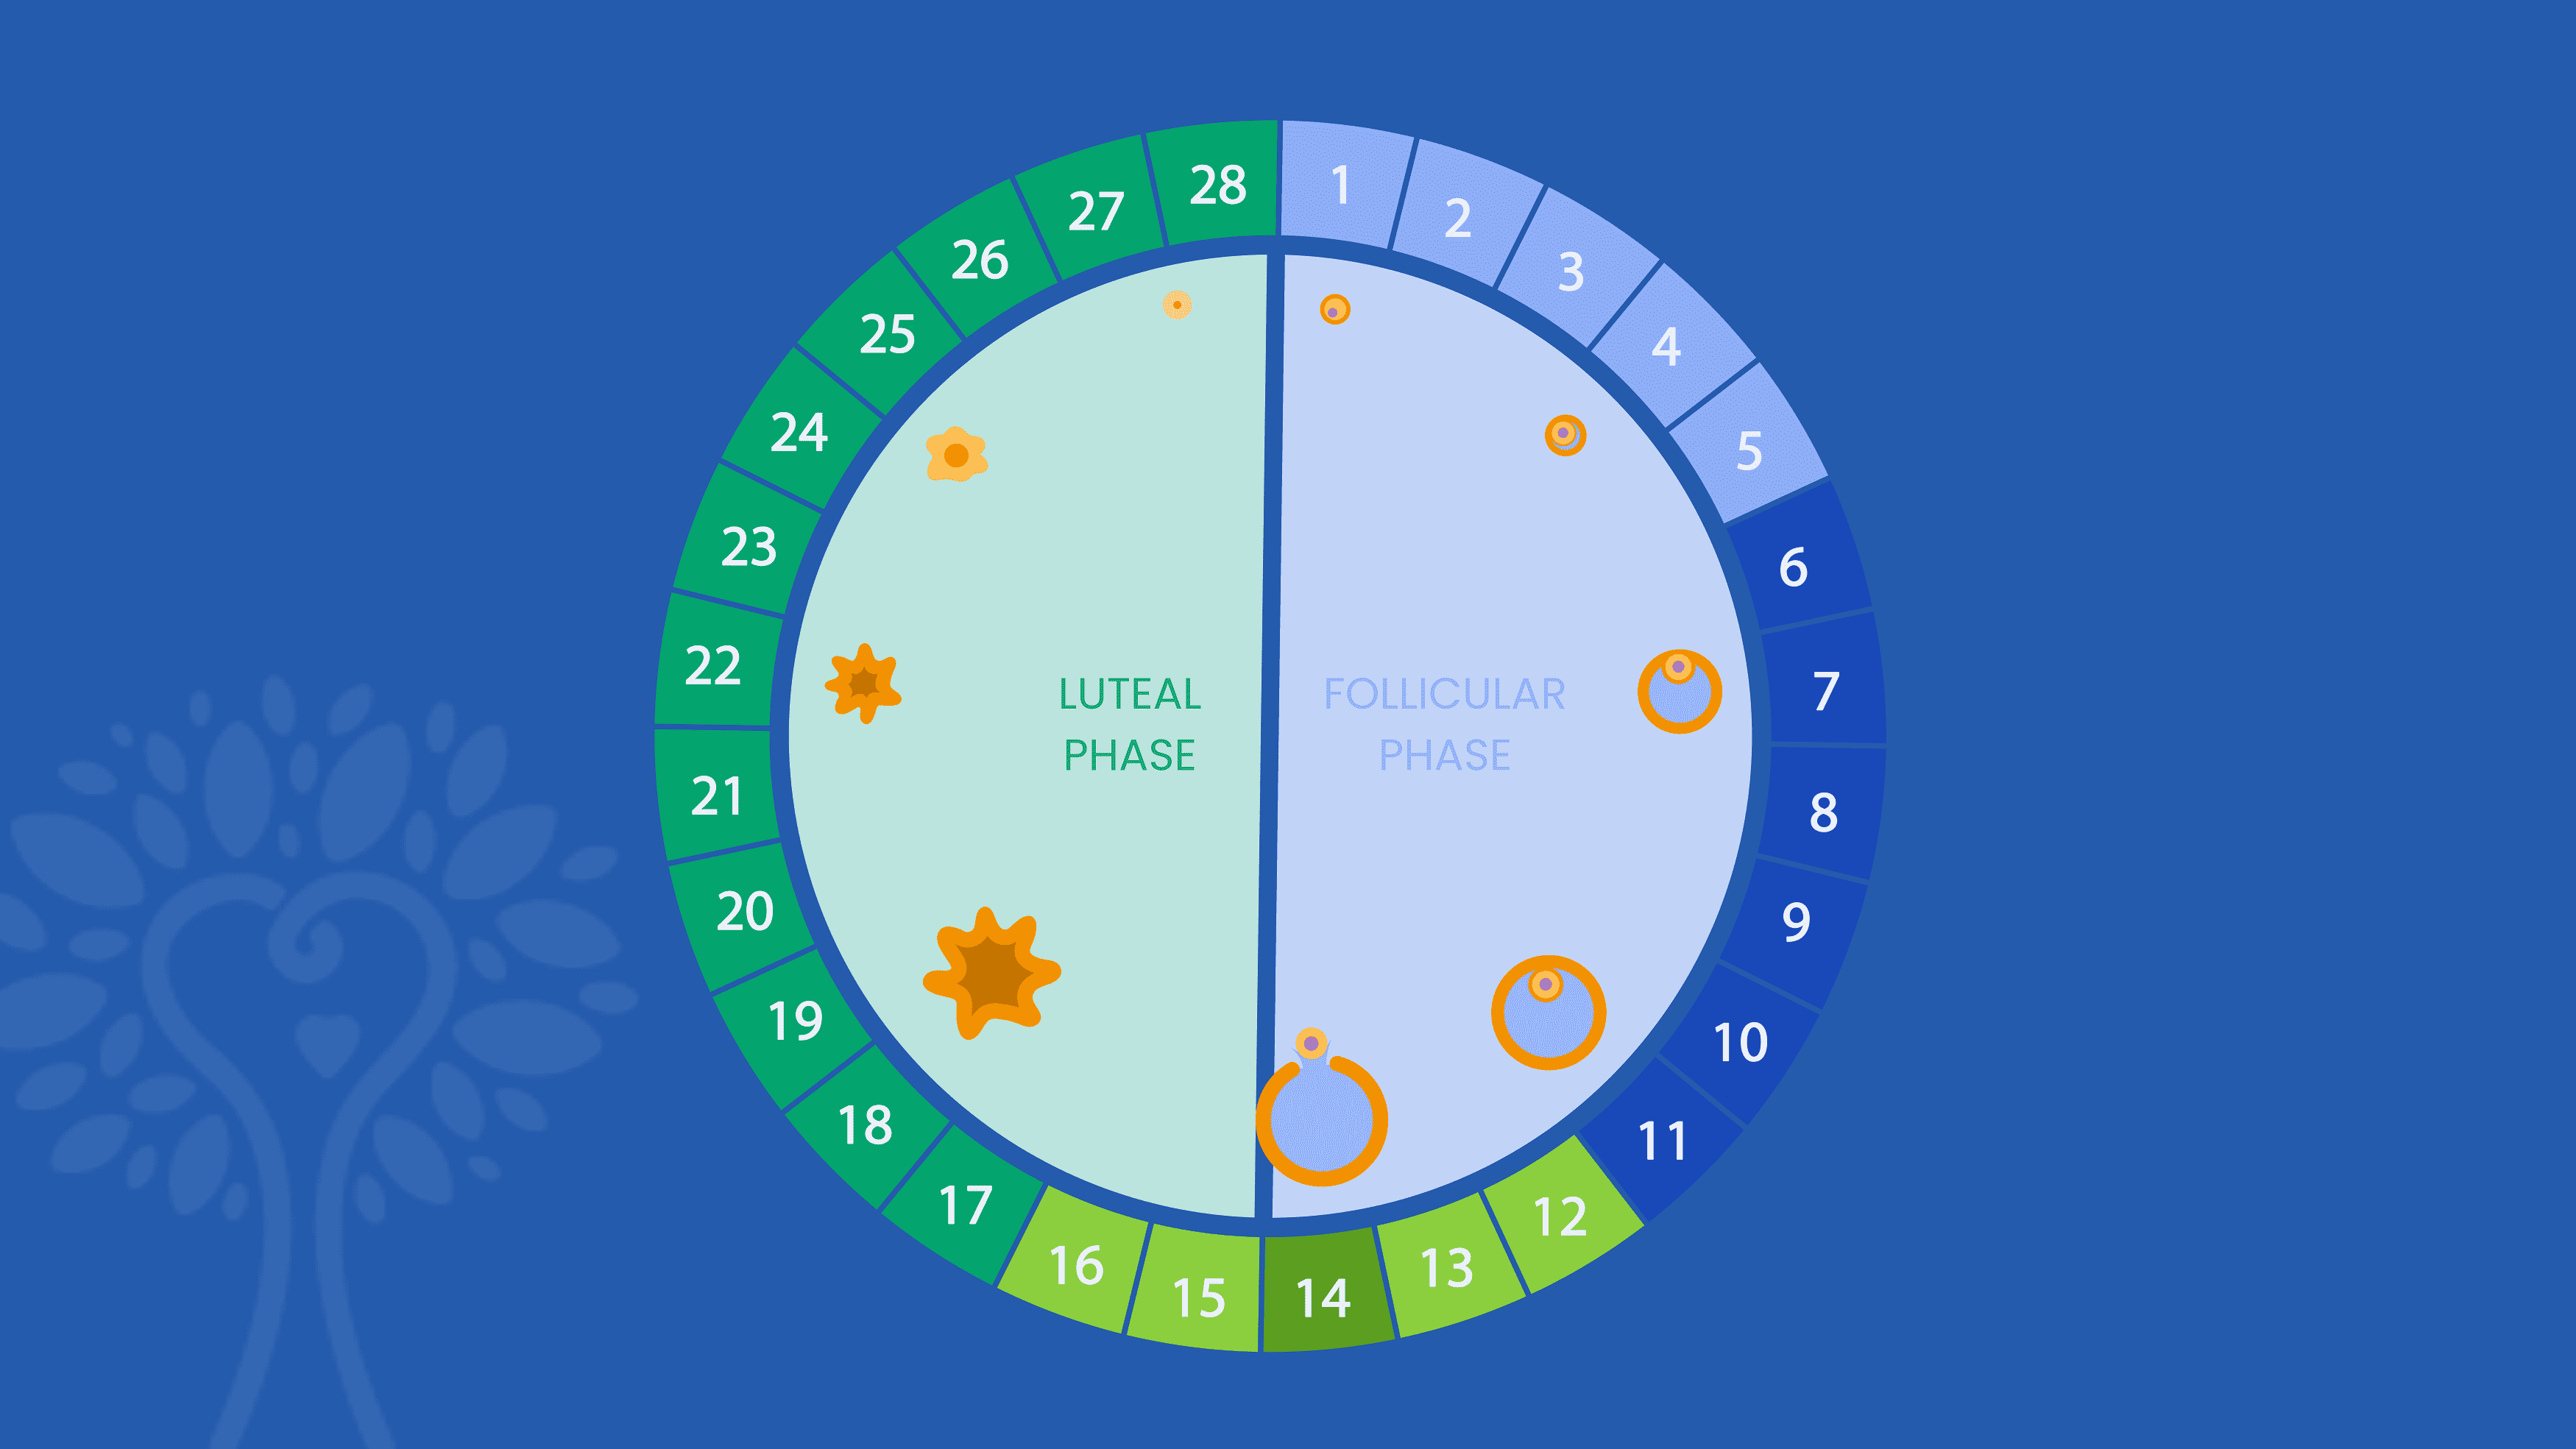 Dark blue background with circular IVF calendar showing the 28 days of a menstrual cycle; the numbers are colored different shades of blue and green according to their phase.